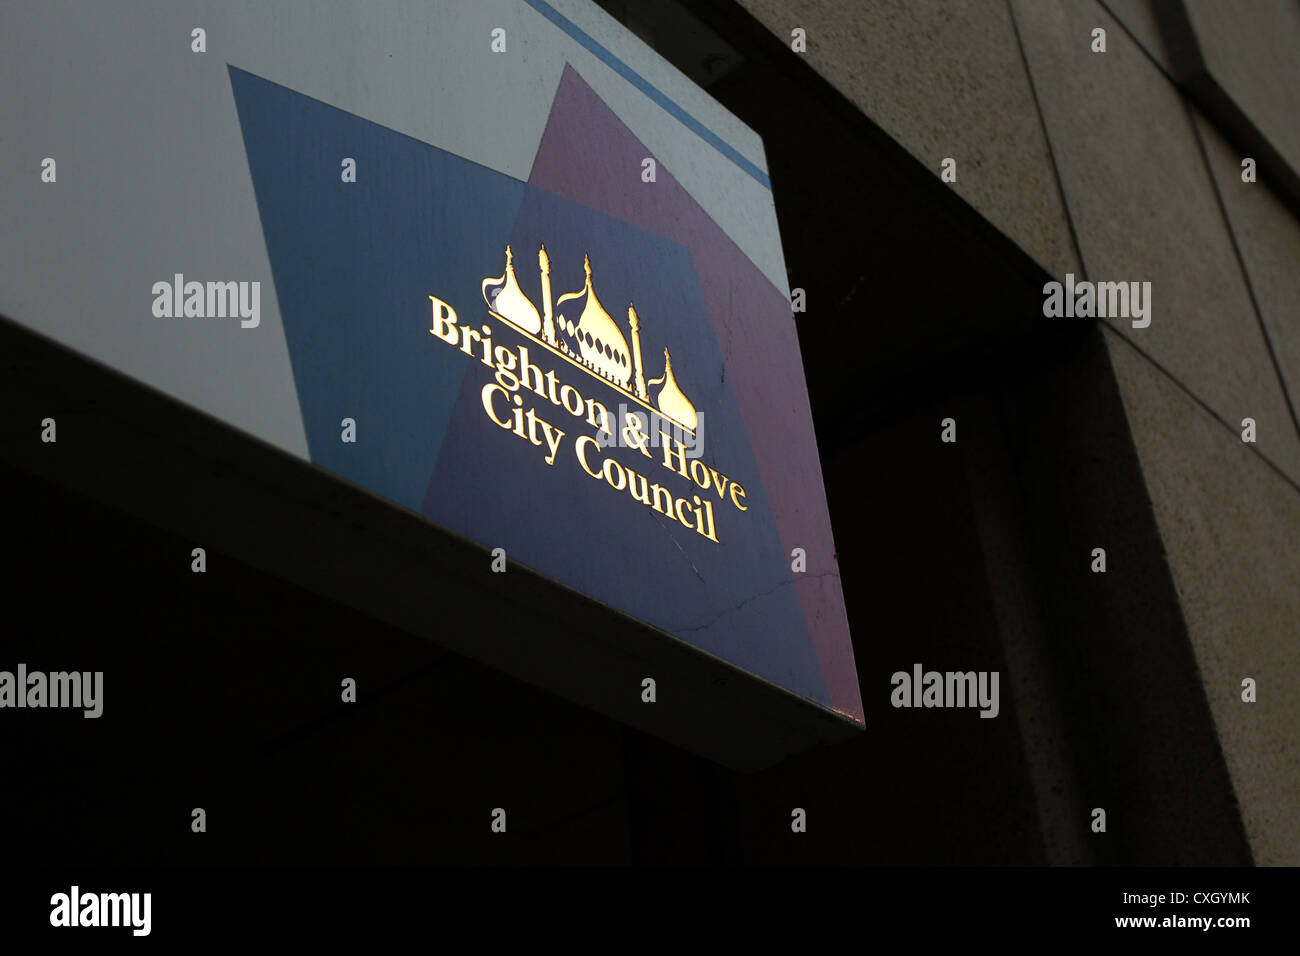 The Brighton & Hove City Council brand and logo on a car park sign in Brighton, East Sussex, UK. Stock Photo